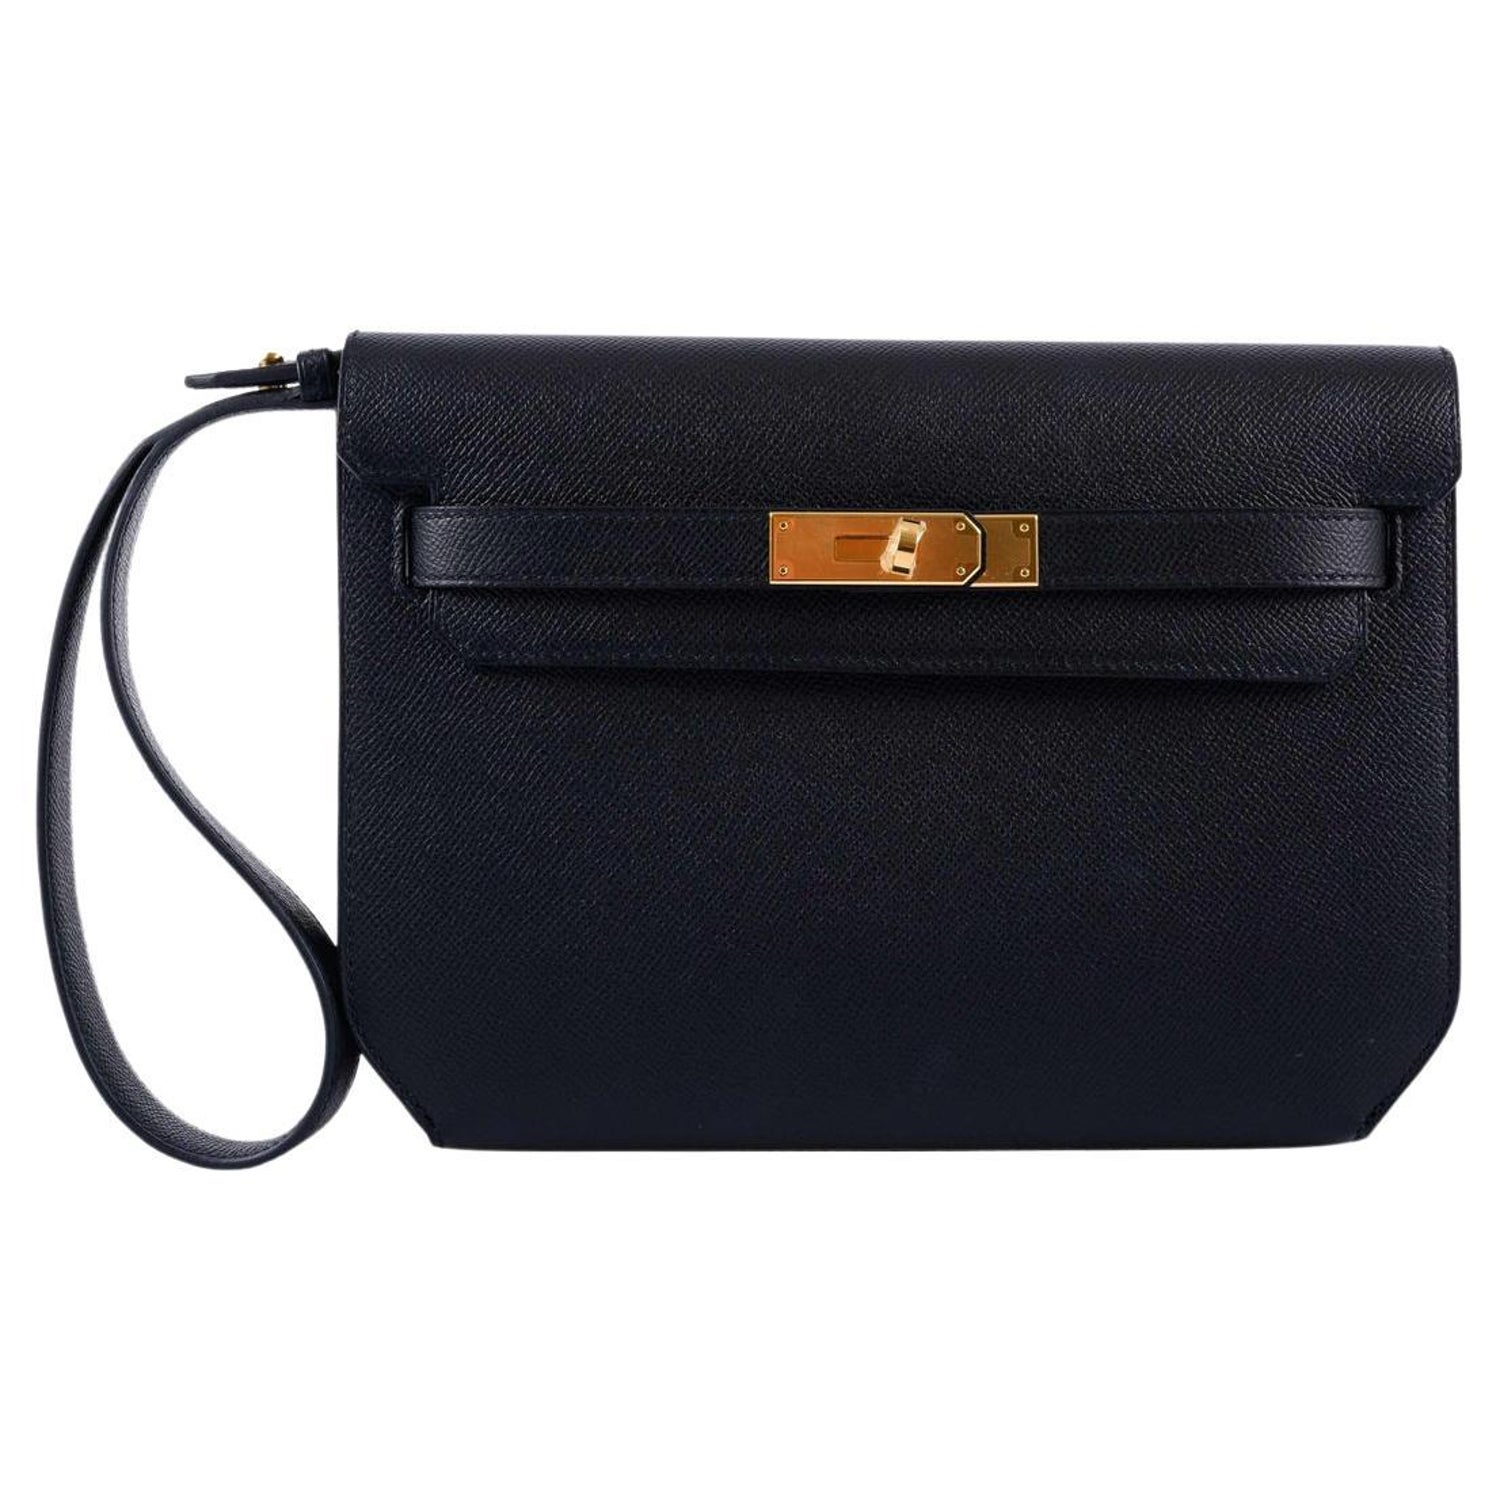 Hermes Kelly Depeche 38 Briefcase Rare Black Epsom #H phw @65 jt, By  Authentic.Buy.Sell